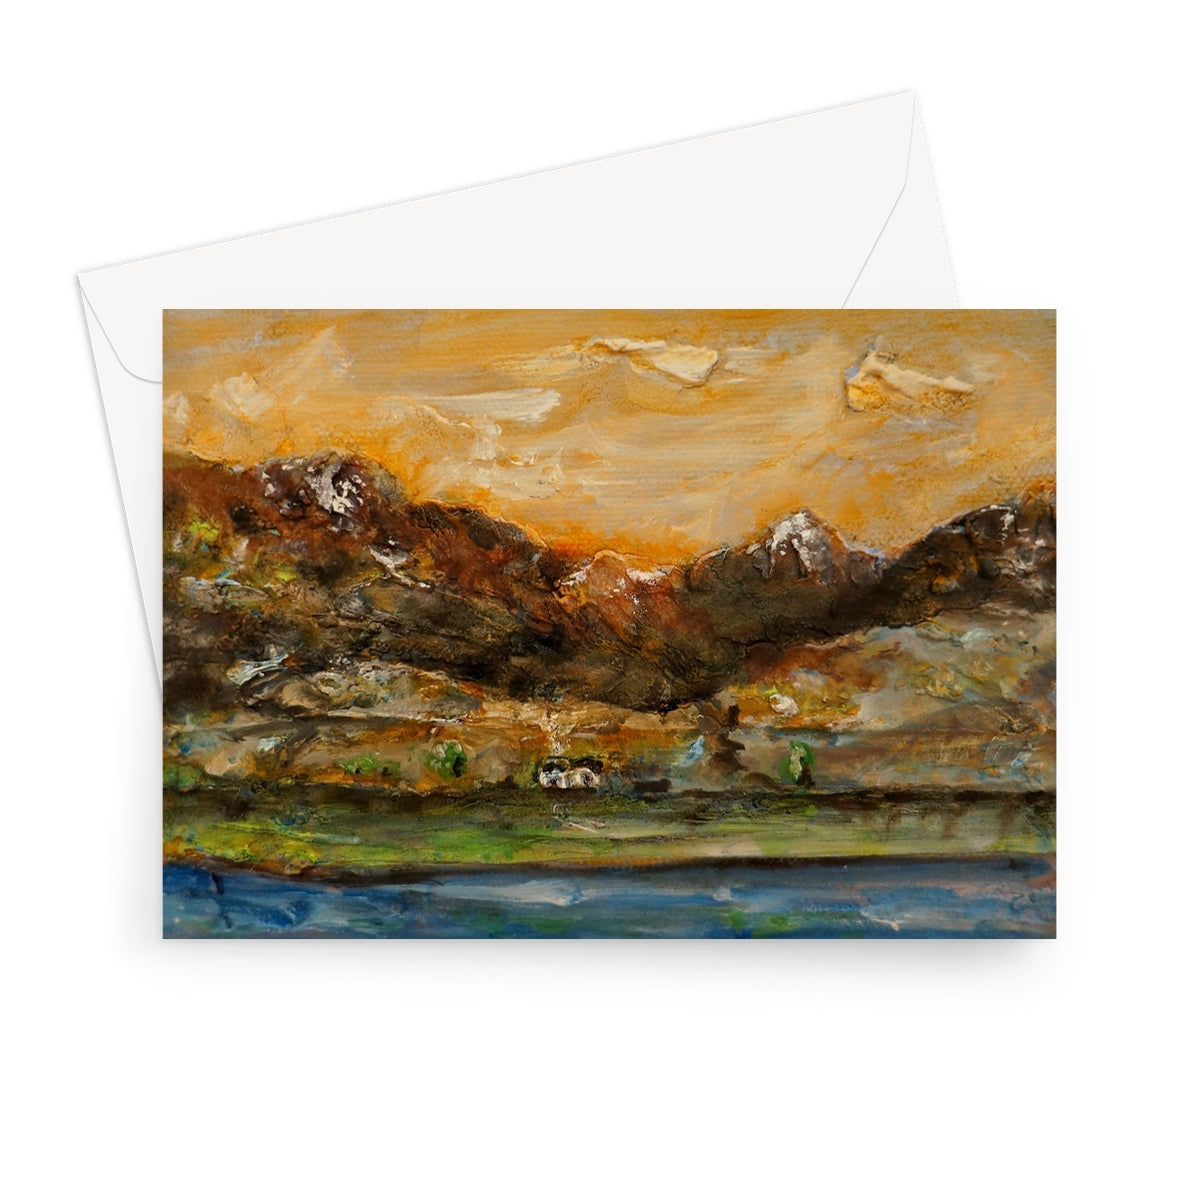 A Glencoe Cottage Art Gifts Greeting Card-Greetings Cards-Glencoe Art Gallery-7"x5"-10 Cards-Paintings, Prints, Homeware, Art Gifts From Scotland By Scottish Artist Kevin Hunter